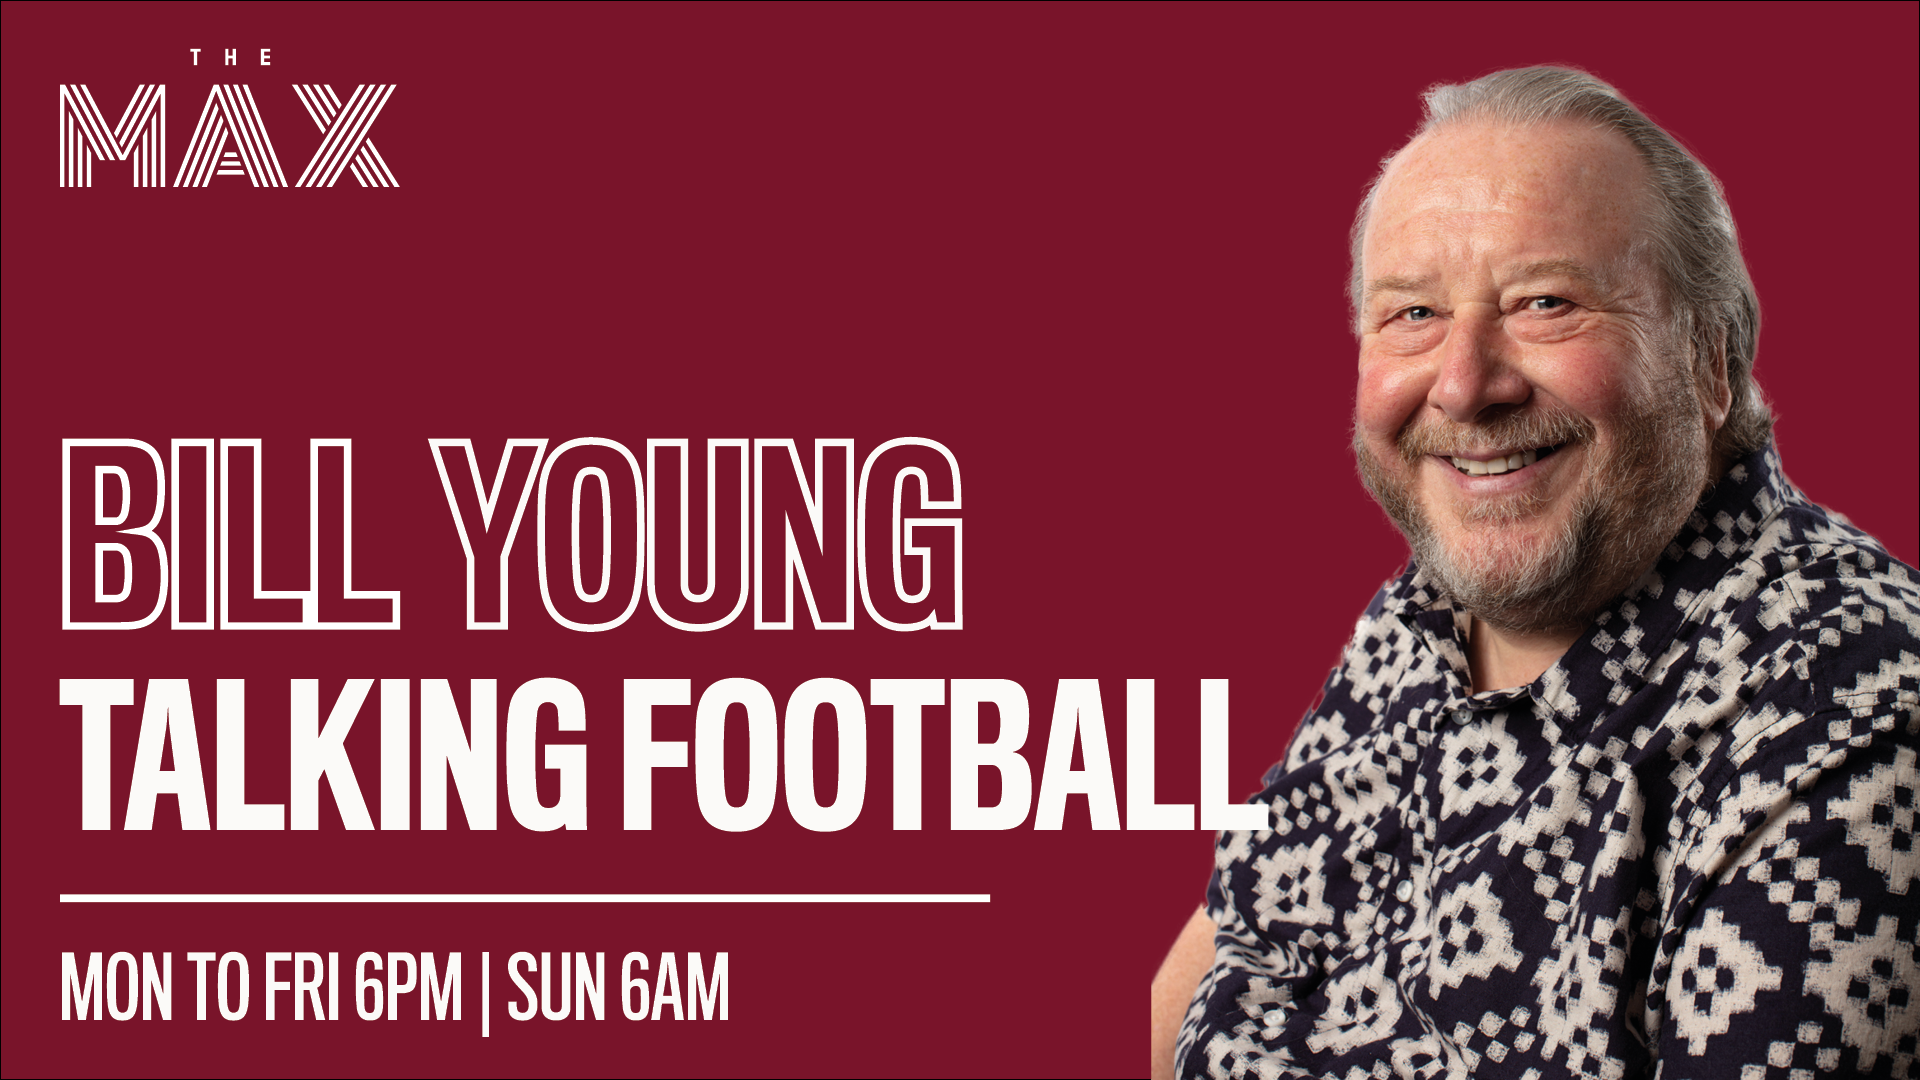 Talking Football with Bill Young - Friday 12th February